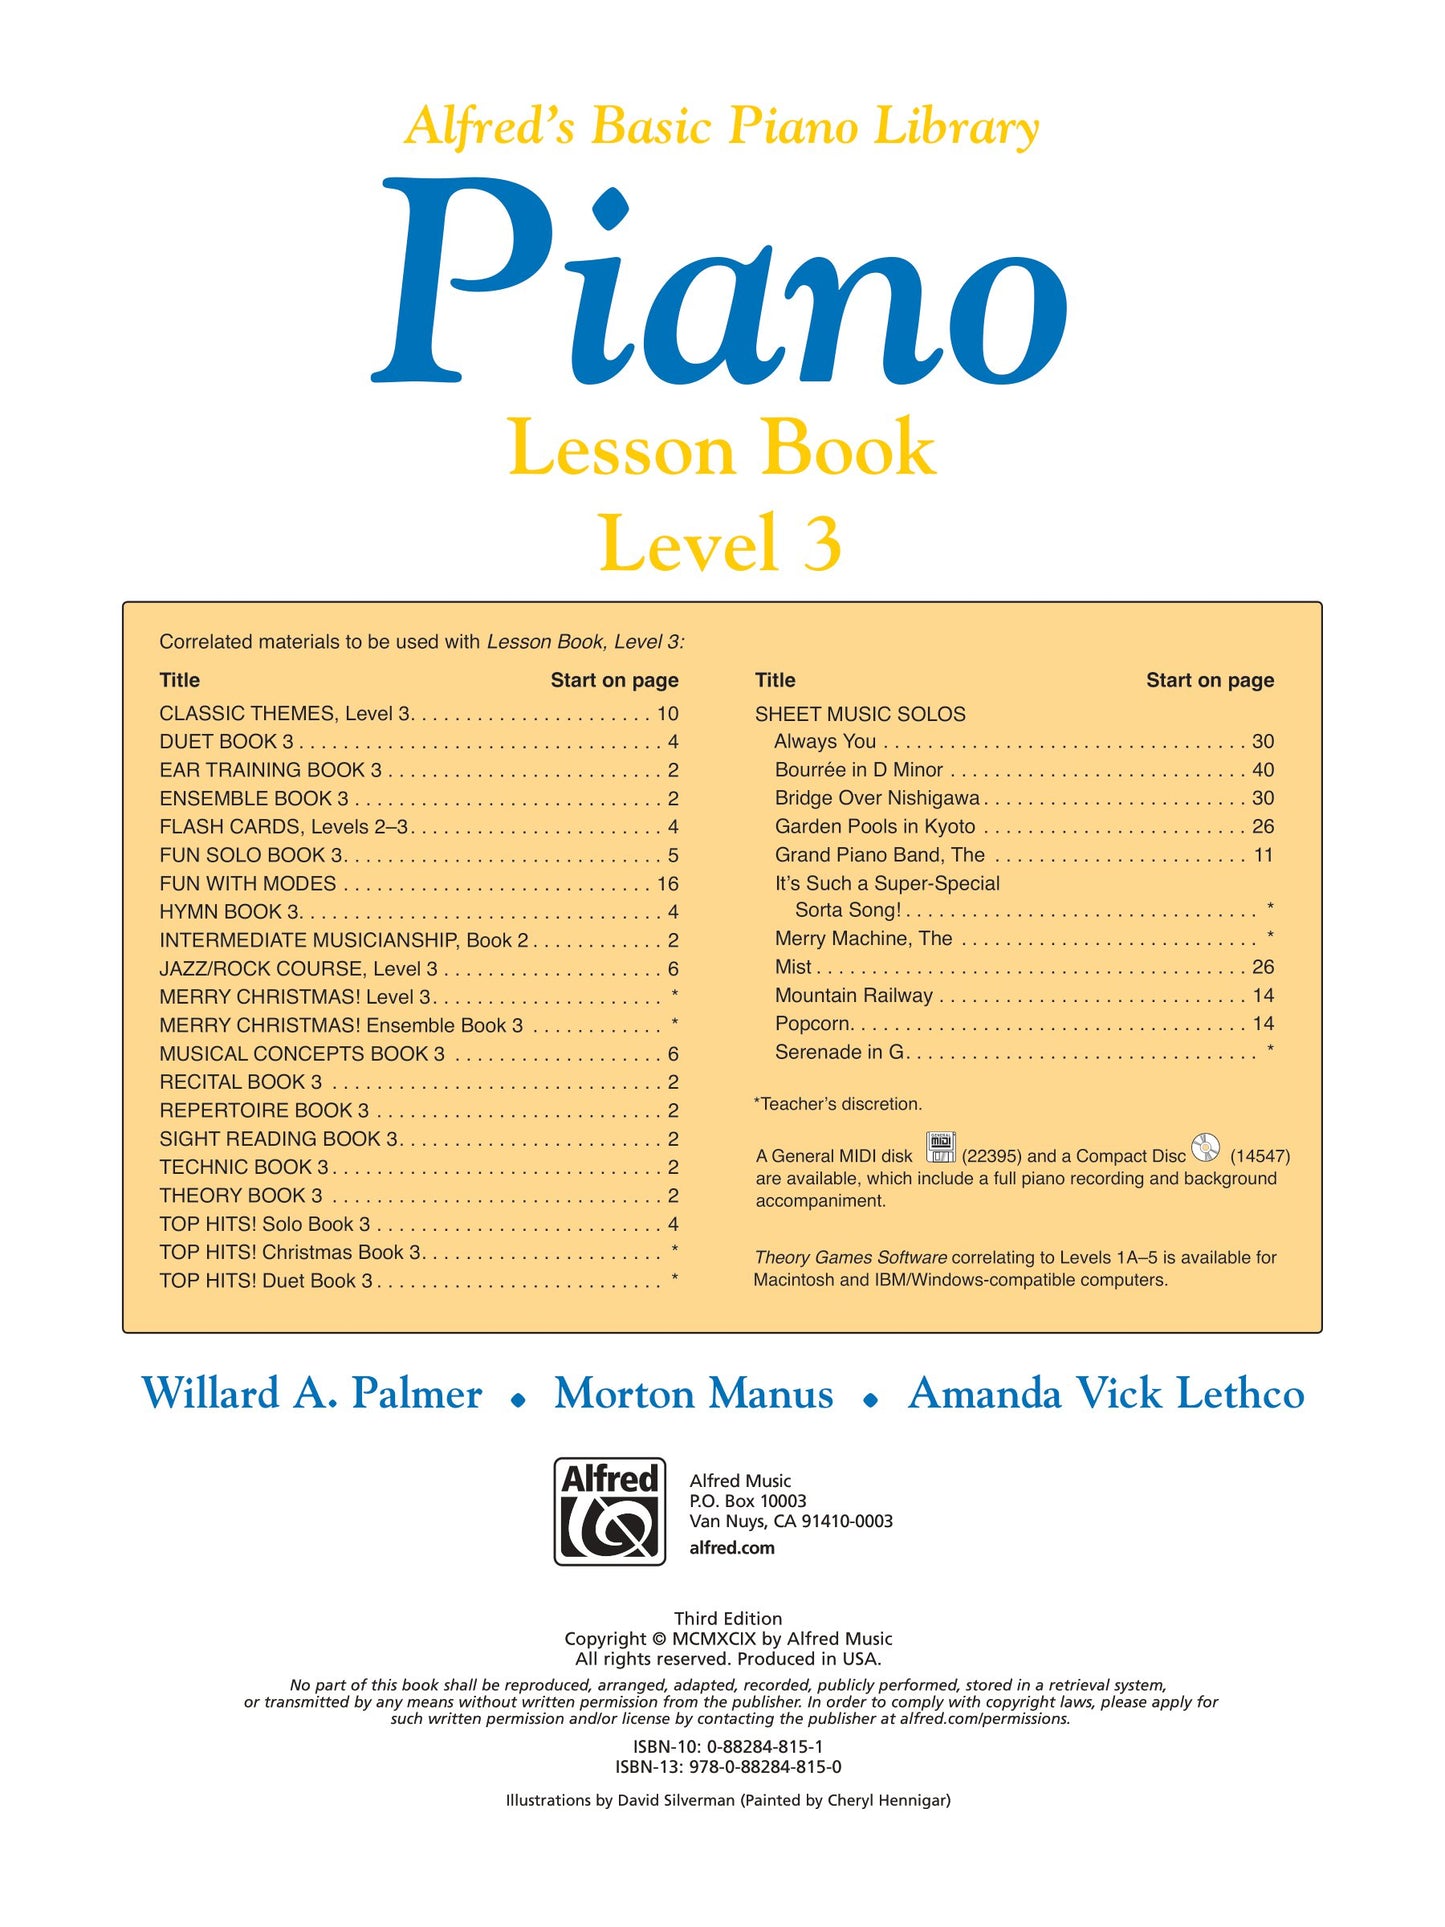 Alfred's Basic Piano Library - Lesson Book Level 3